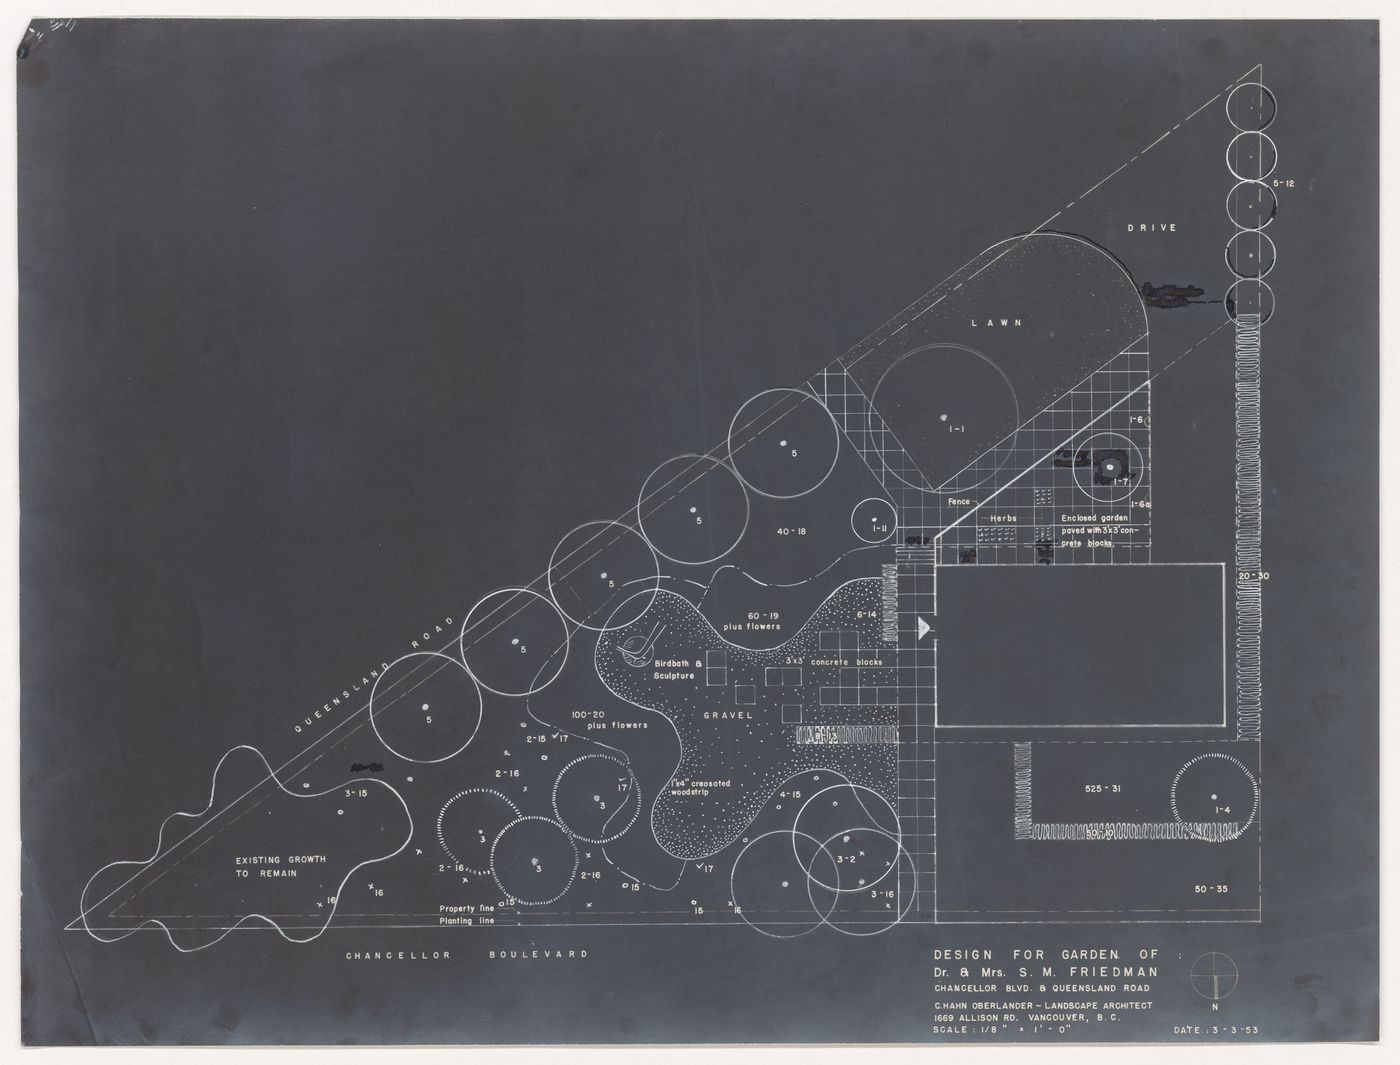 Landscaping plan for Dr. and Mrs. S. Friedman Garden, Vancouver, British Columbia